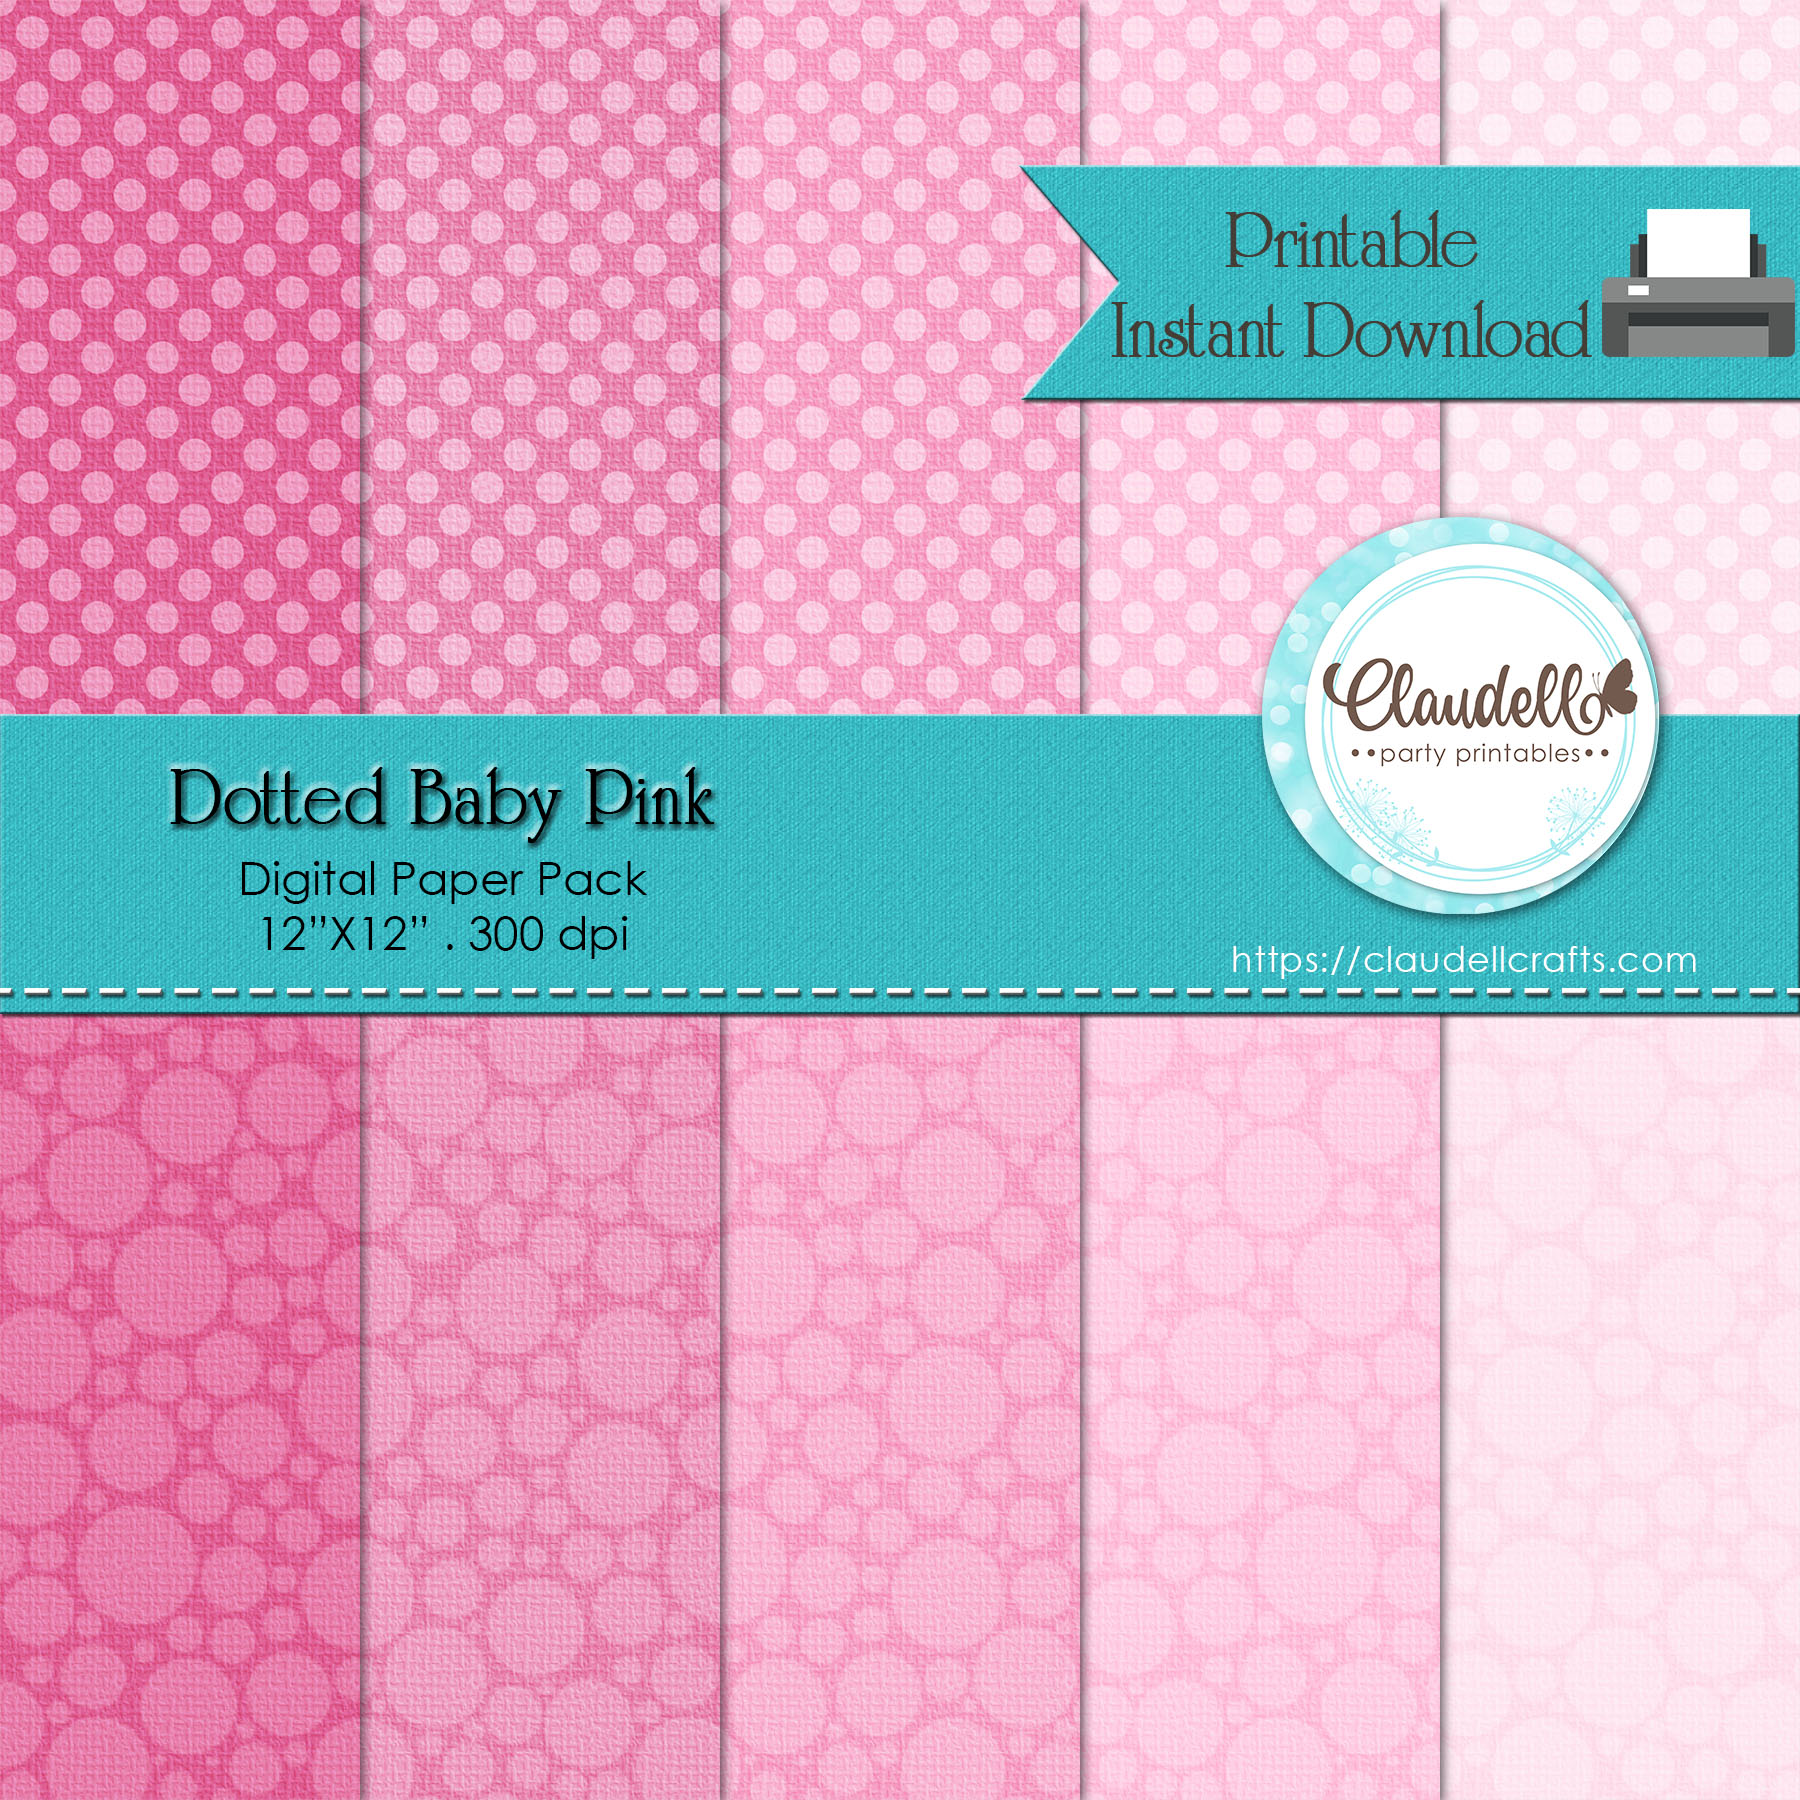 Dotted Baby Pink Digital Paper Pack (10) - 12